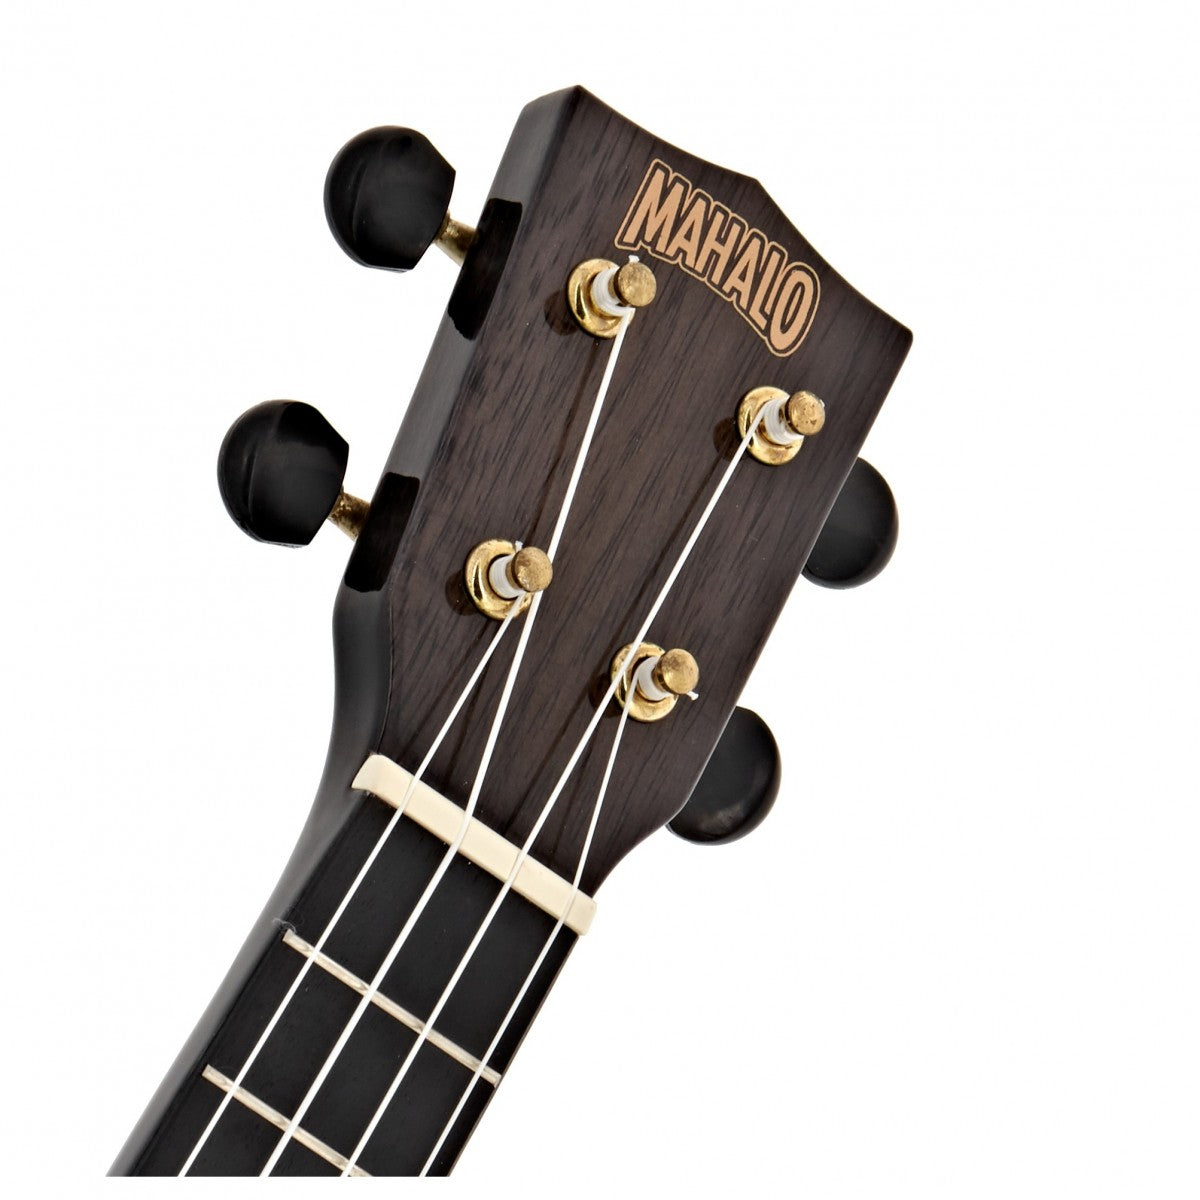 Mahalo Hano Series Concert Acoustic Ukulele 4 String Guitar with 16 Frets Transparent Black MH2TBK